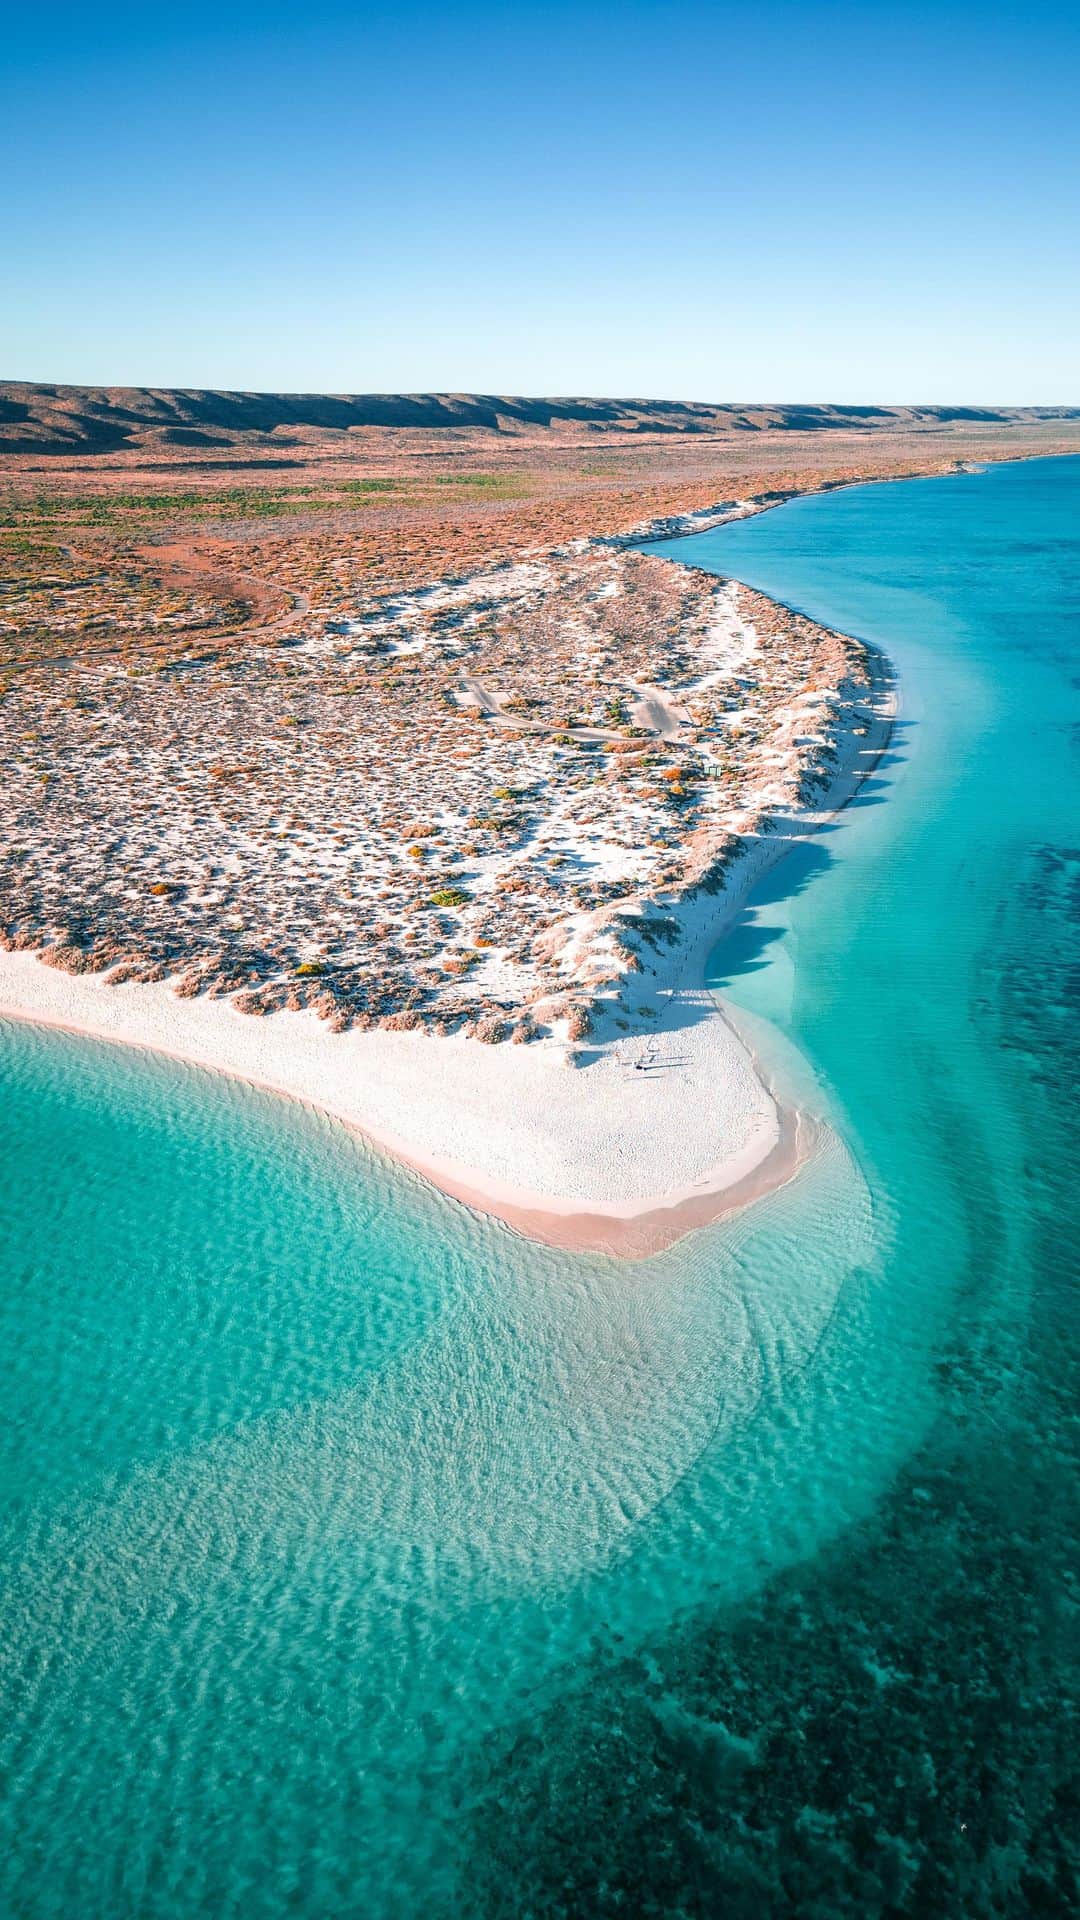 のインスタグラム：「Every year we are drawn back to this special place and every year it delivers something new and spectacular to experience 🌊  This is the breathtakingly beautiful Ningaloo reef/Nyinggulu which is about a 13 hour epic road trip from Perth or short 2 hour flight.  Ningaloo is a world heritage listed area, the worlds largest fringing reef, home to a wide variety of marine life - turtles, whale sharks, rays, dugongs, dolphins, tropical fish, sharks and so much more. From June to November you’ll also see the migrating humpback whales and their calves. The nearby Exmouth gulf is a nursery for the humpbacks and other marine life and plays a vital role in the health of the reef. You may also see rock wallabies, ospreys, sea eagles, emus, dingos and kangaroos on your adventures.   This year we spent our time exploring the most northern part of the reef in Cape Range national park. We stayed in eco friendly accommodations - a rustic chalet and an off grid campervan. Both were perfectly located for spending more time in the water and less time driving.   Some of our favorite spots were - 🩵 Turquoise bay 🩵 Lakeside 🩵 Oyster Stacks 🩵 Yardie Creek gorge 🩵 Osprey bay   I’ll be sharing more details very soon on my upcoming blog about where to stay, snorkeling recommendations, and many more tips to help you plan your trip here.   #ningalooreef #beautifuldestinations #wathedreamstate #seeaustralia #earthpix #travelcommunity #australiascoralcoast #turtles #sustainabletravel #dolphins #standuppaddle #turquoisebay」